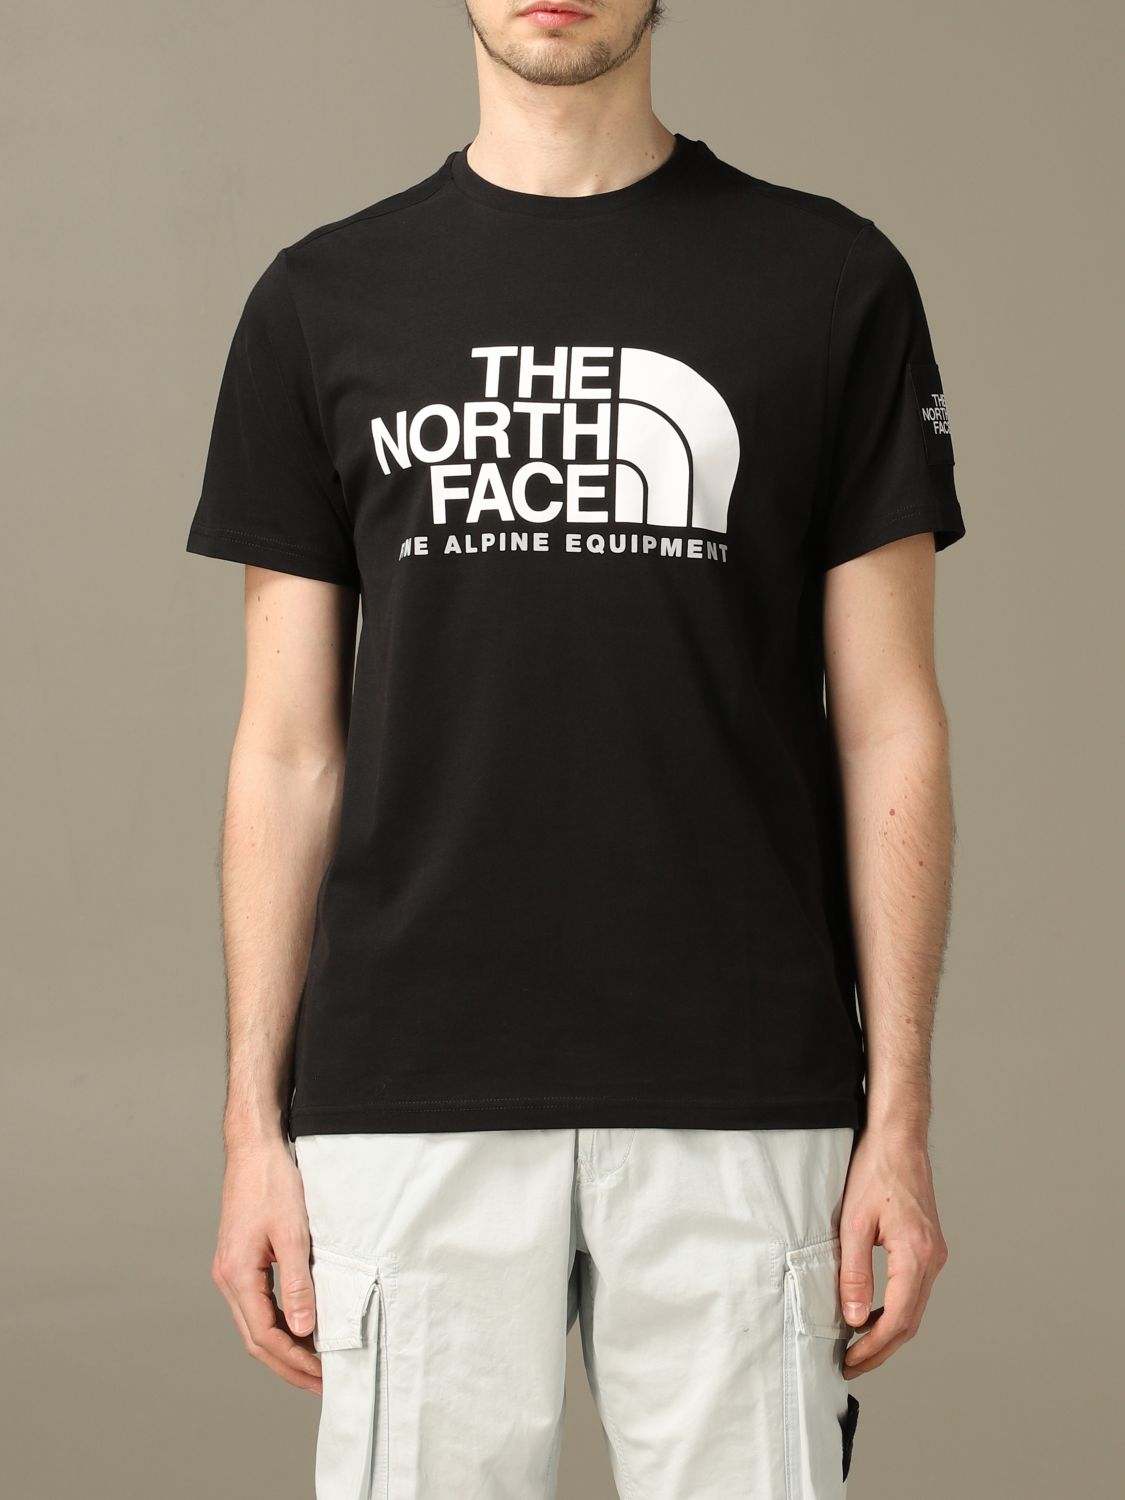 T-Shirt The North Face NF0A4M6N Giglio EN